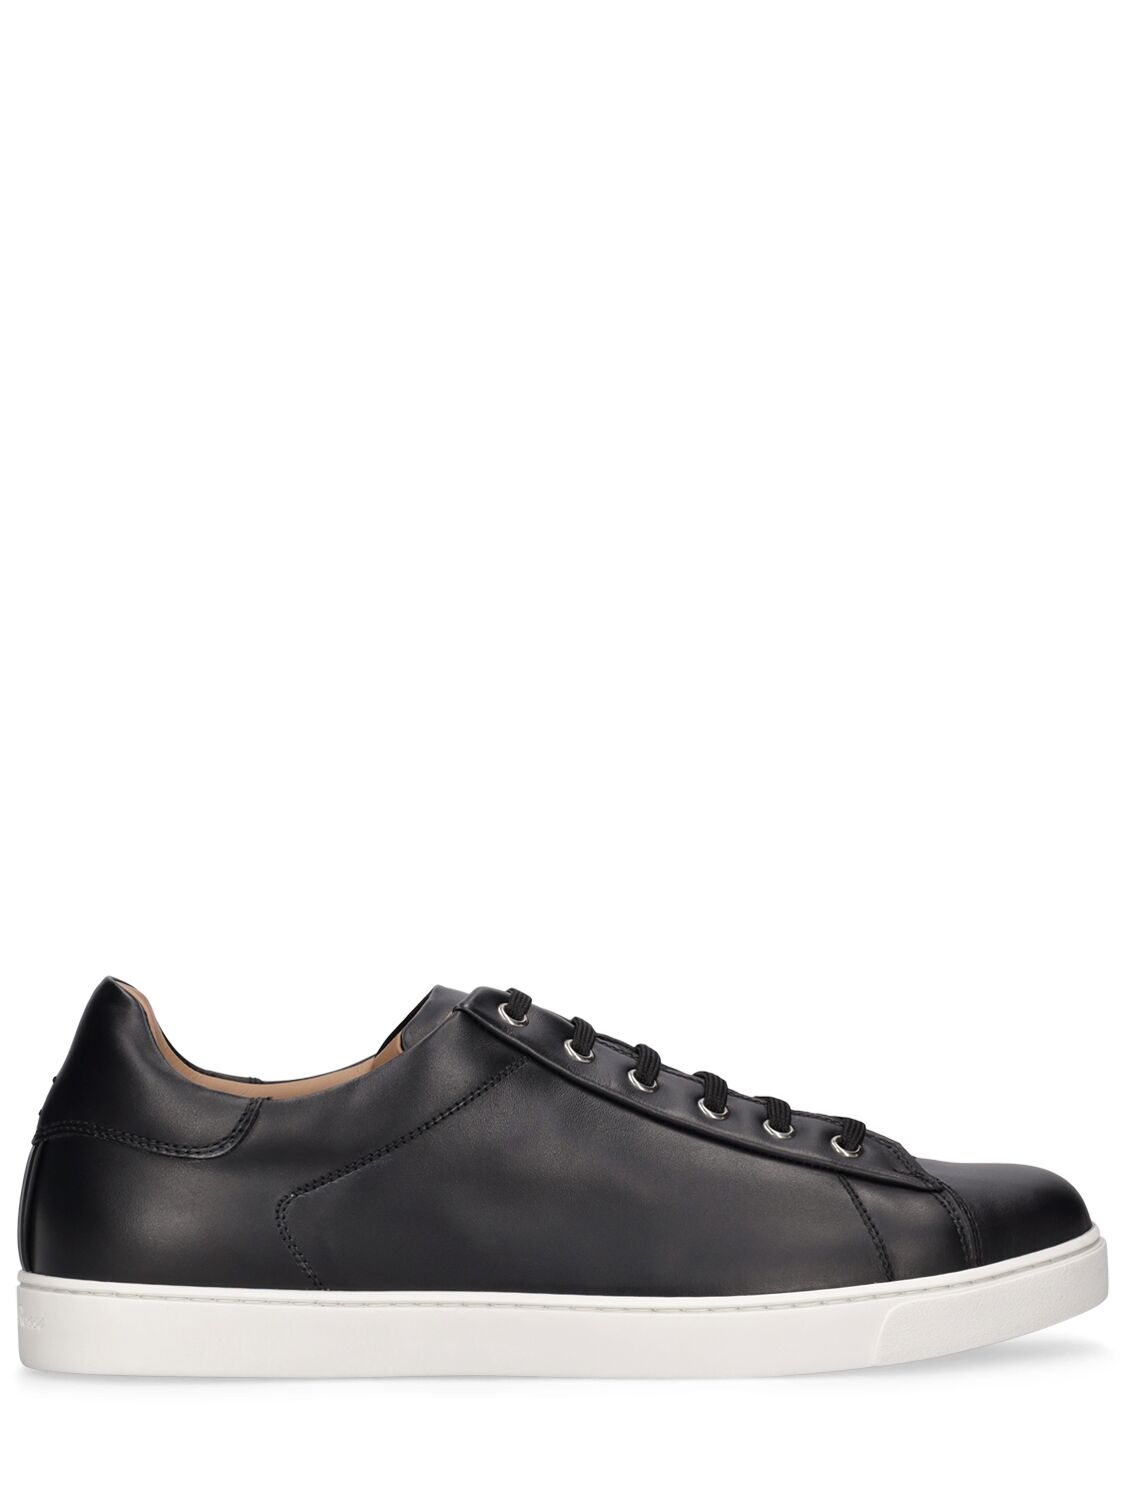 Image of Low Top Leather Sneakers